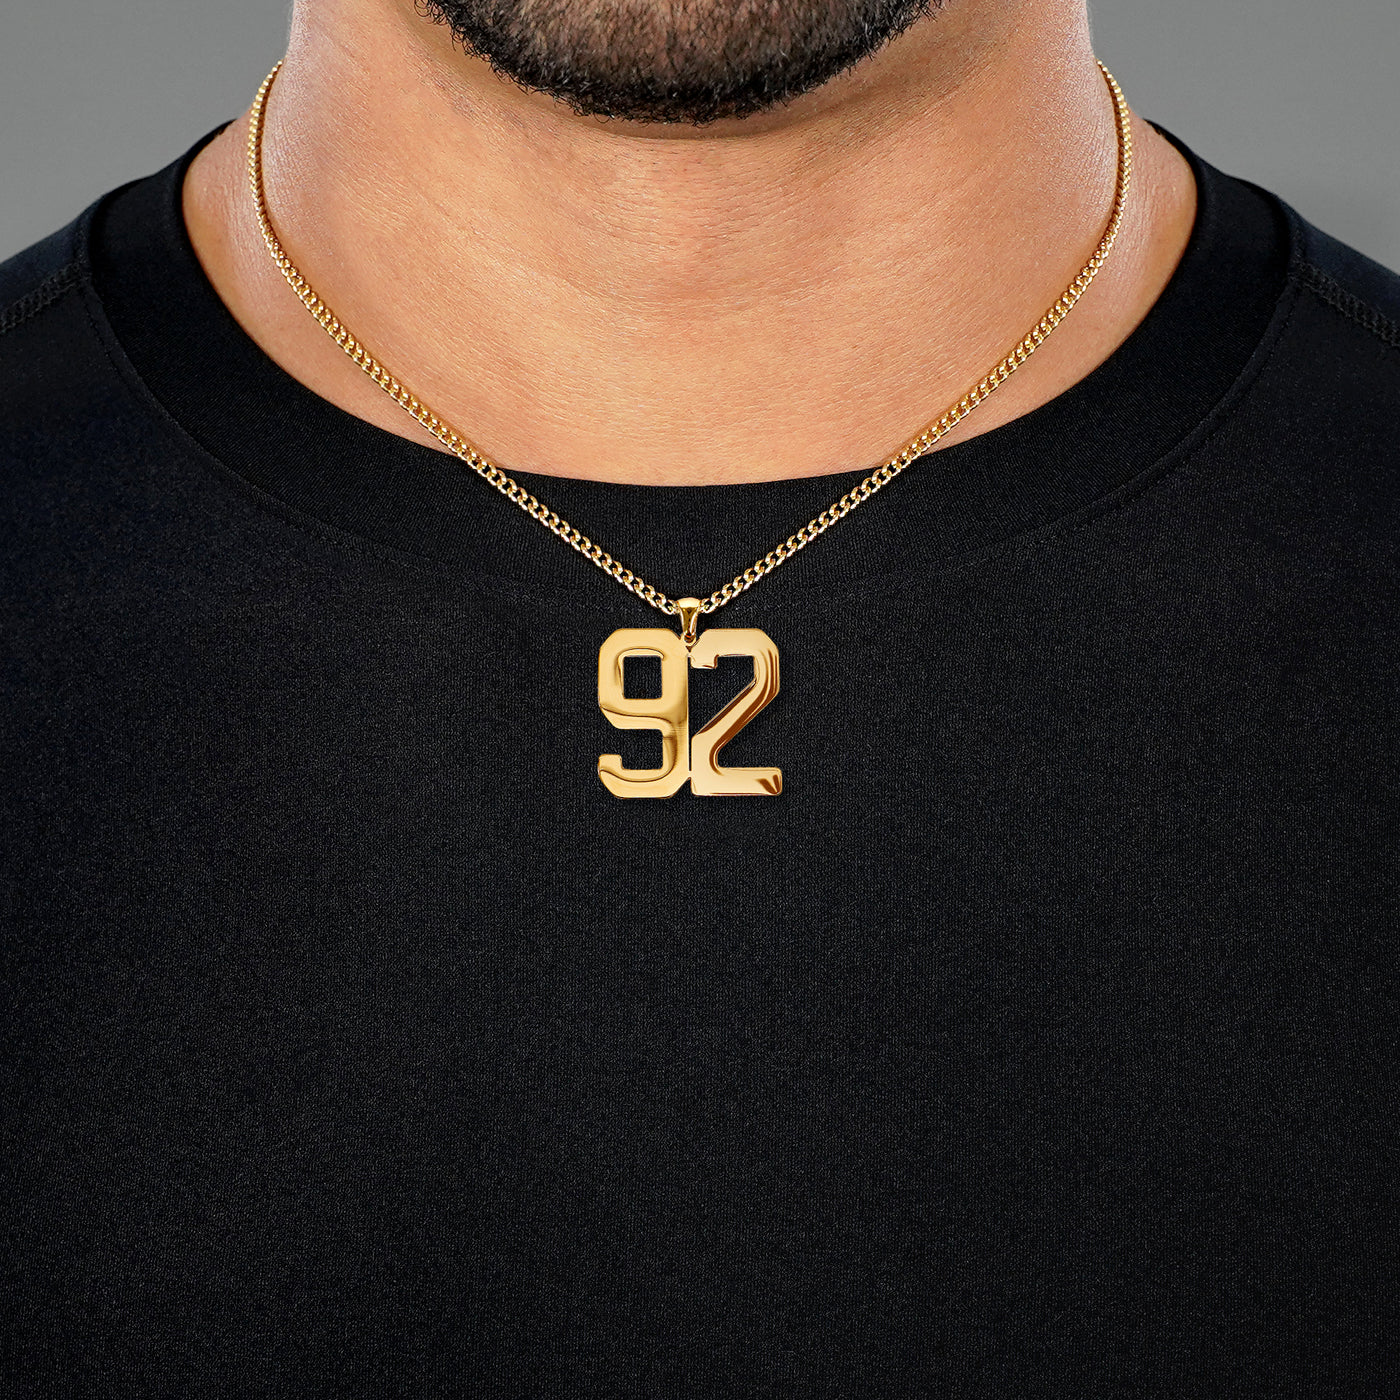 92 Number Pendant with Chain Necklace - Gold Plated Stainless Steel